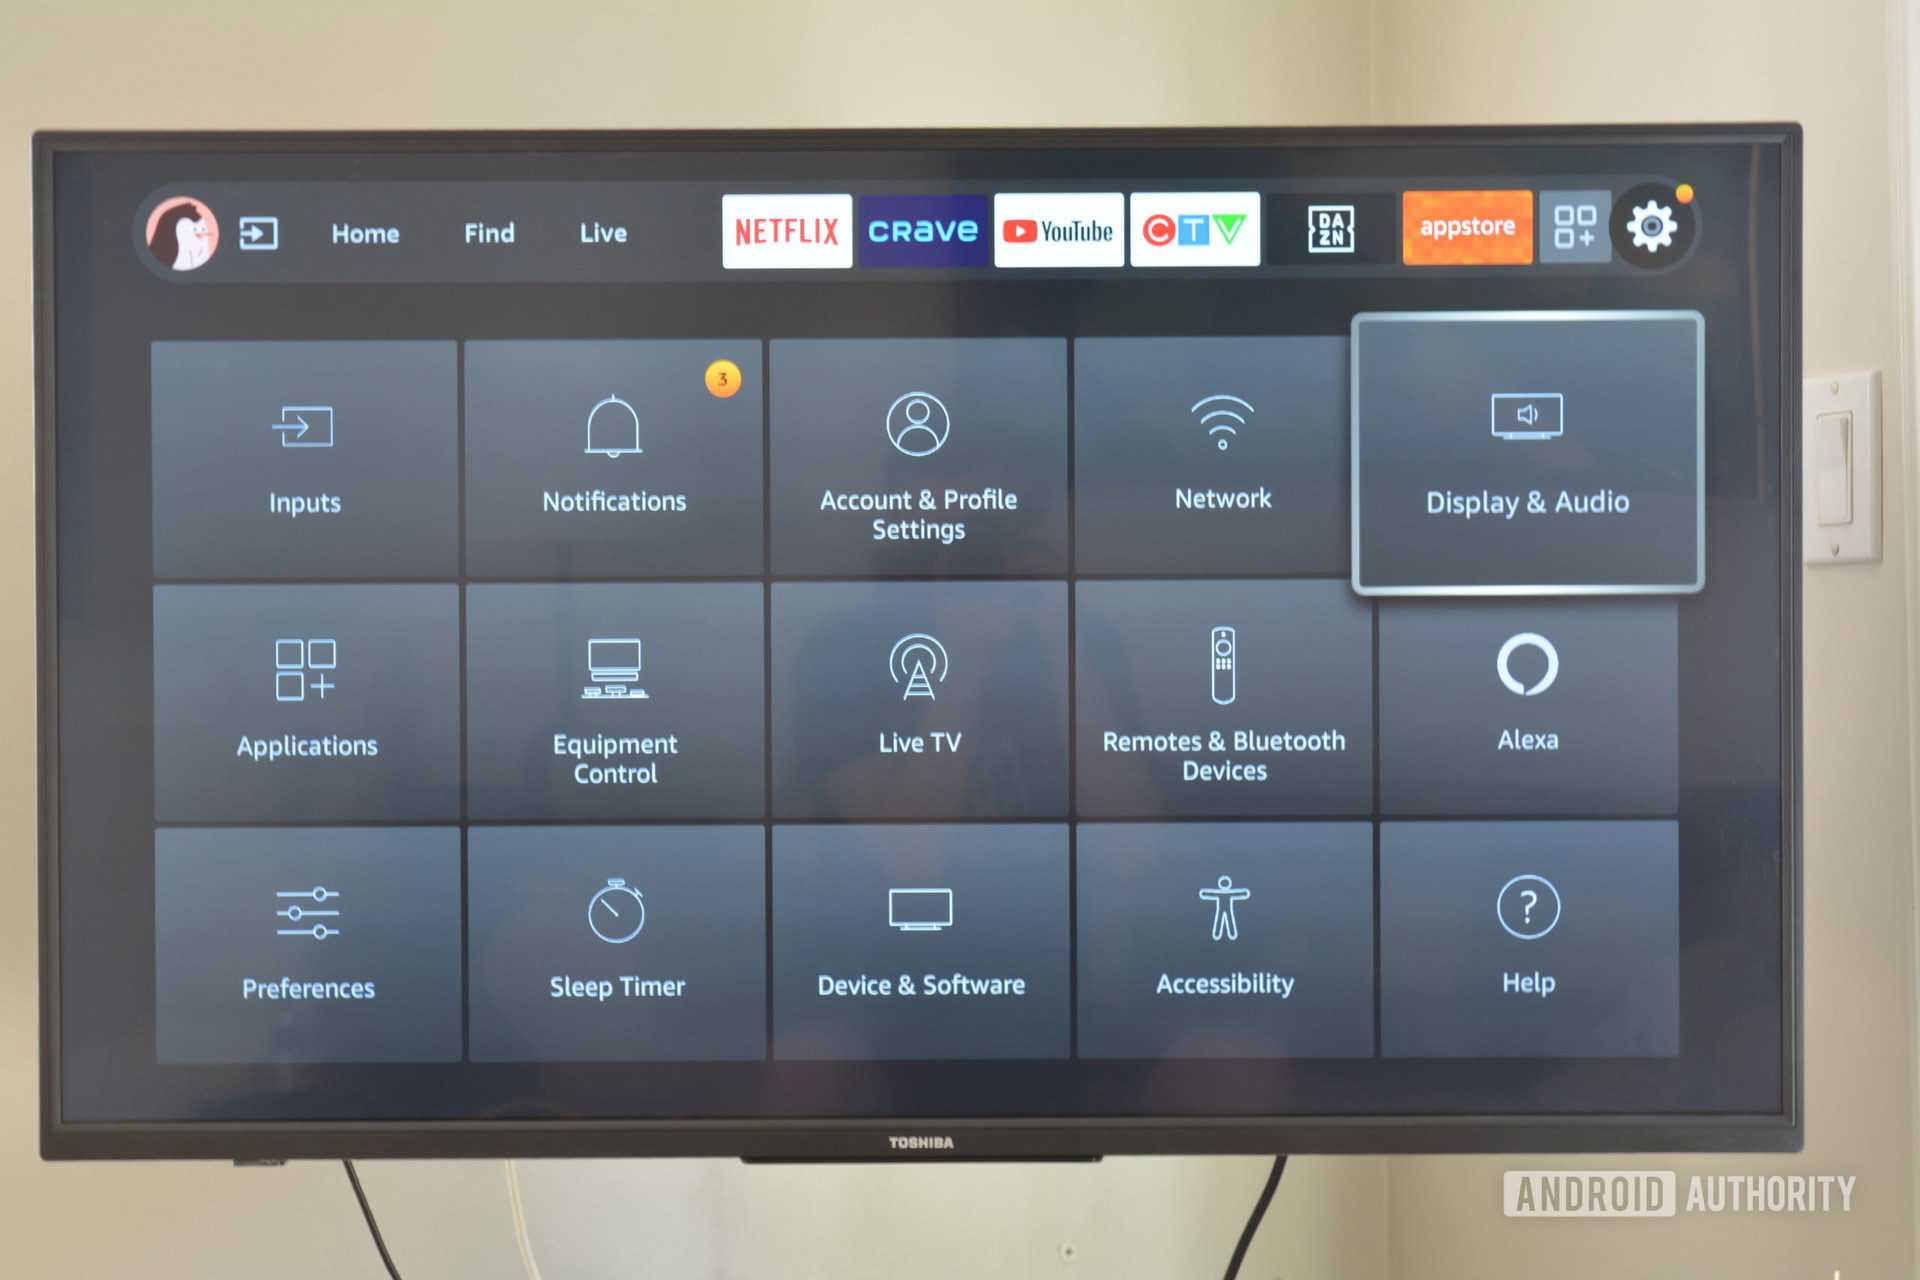 How to Chromecast to Samsung TV from Android or iPhone